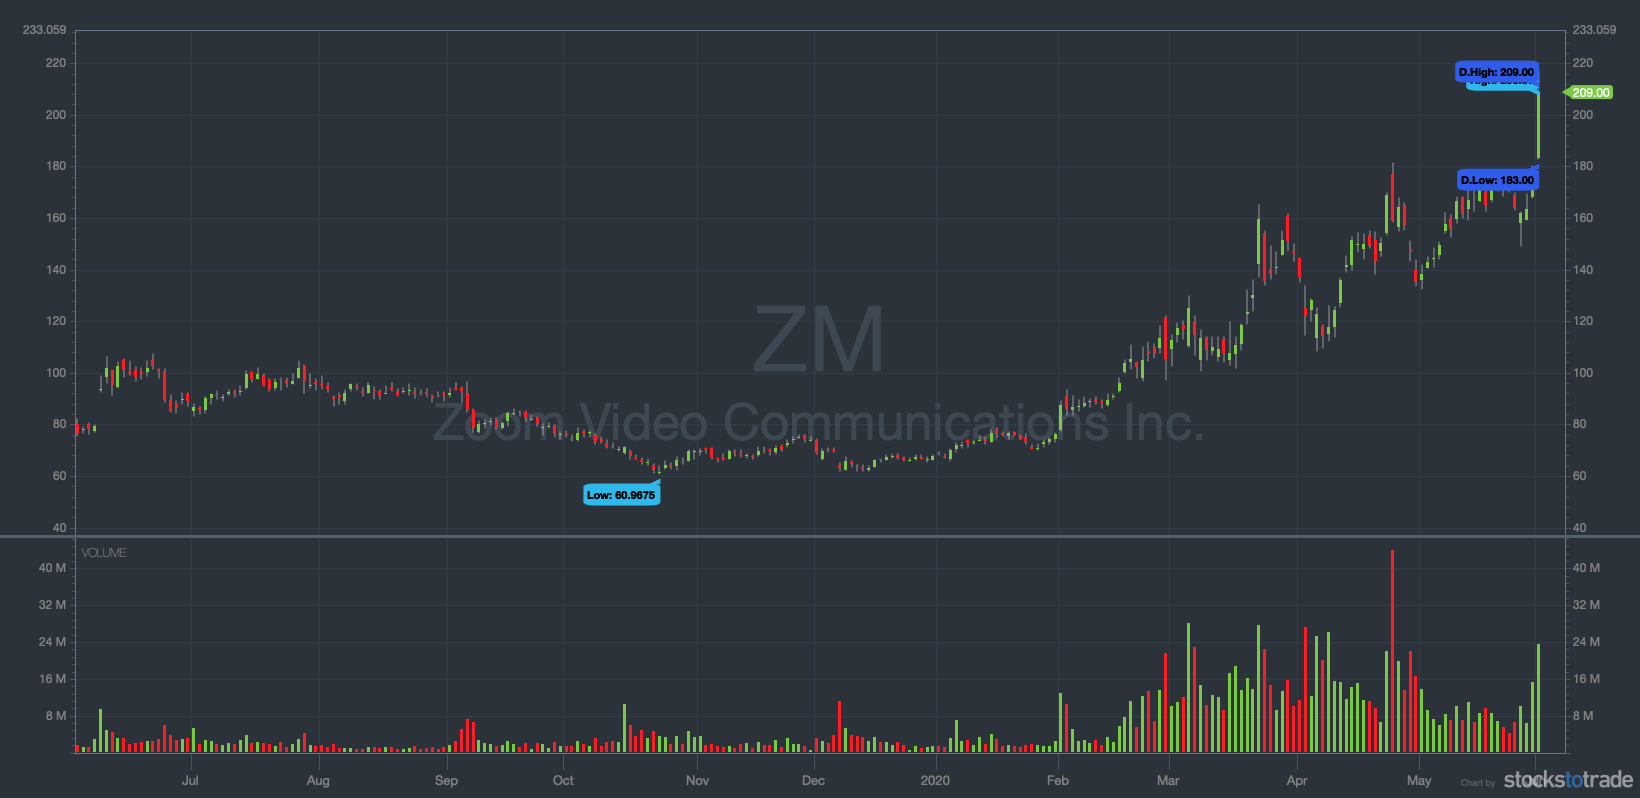 pandemic swing trades ZM 1 year chart